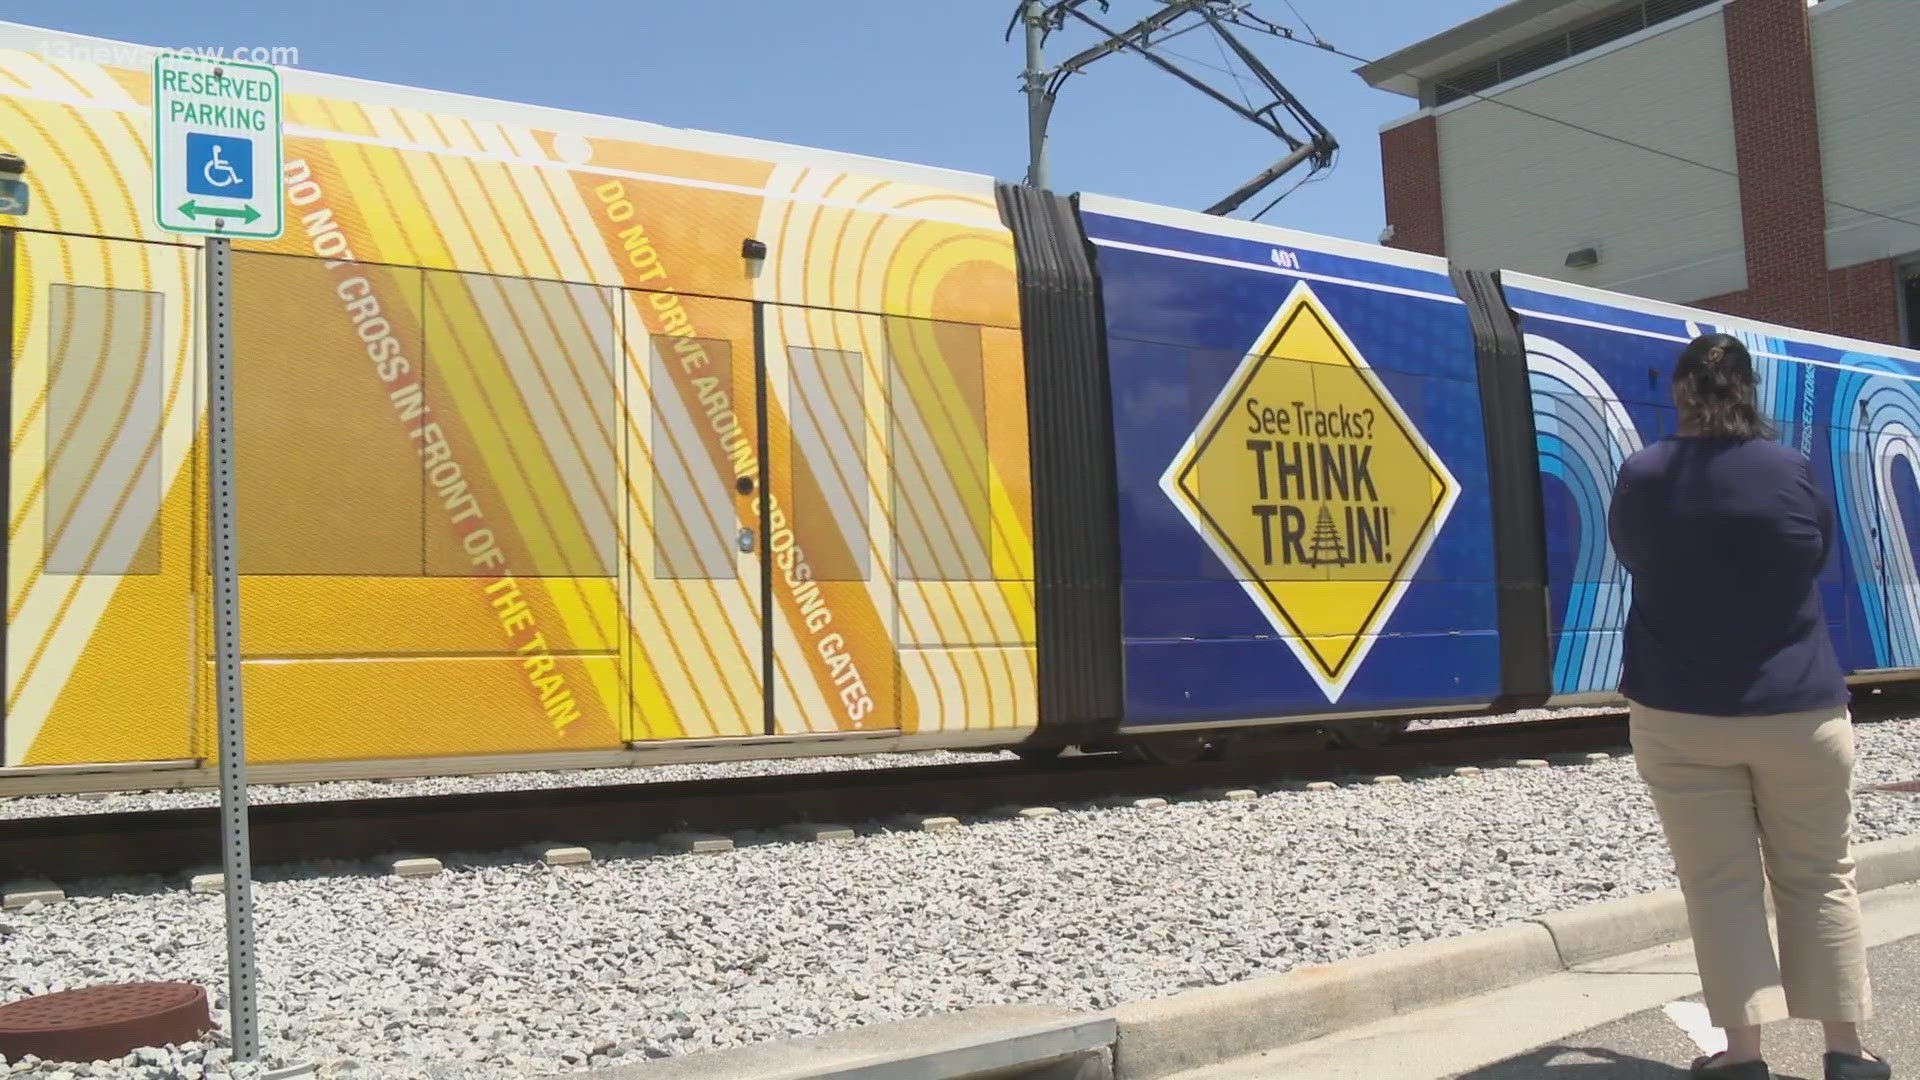 The "Operation Lifesaver Safety Campaign" kicked off Monday with the unveiling of a wrapped Tide train sharing safety reminders with riders, drivers and pedestrians.